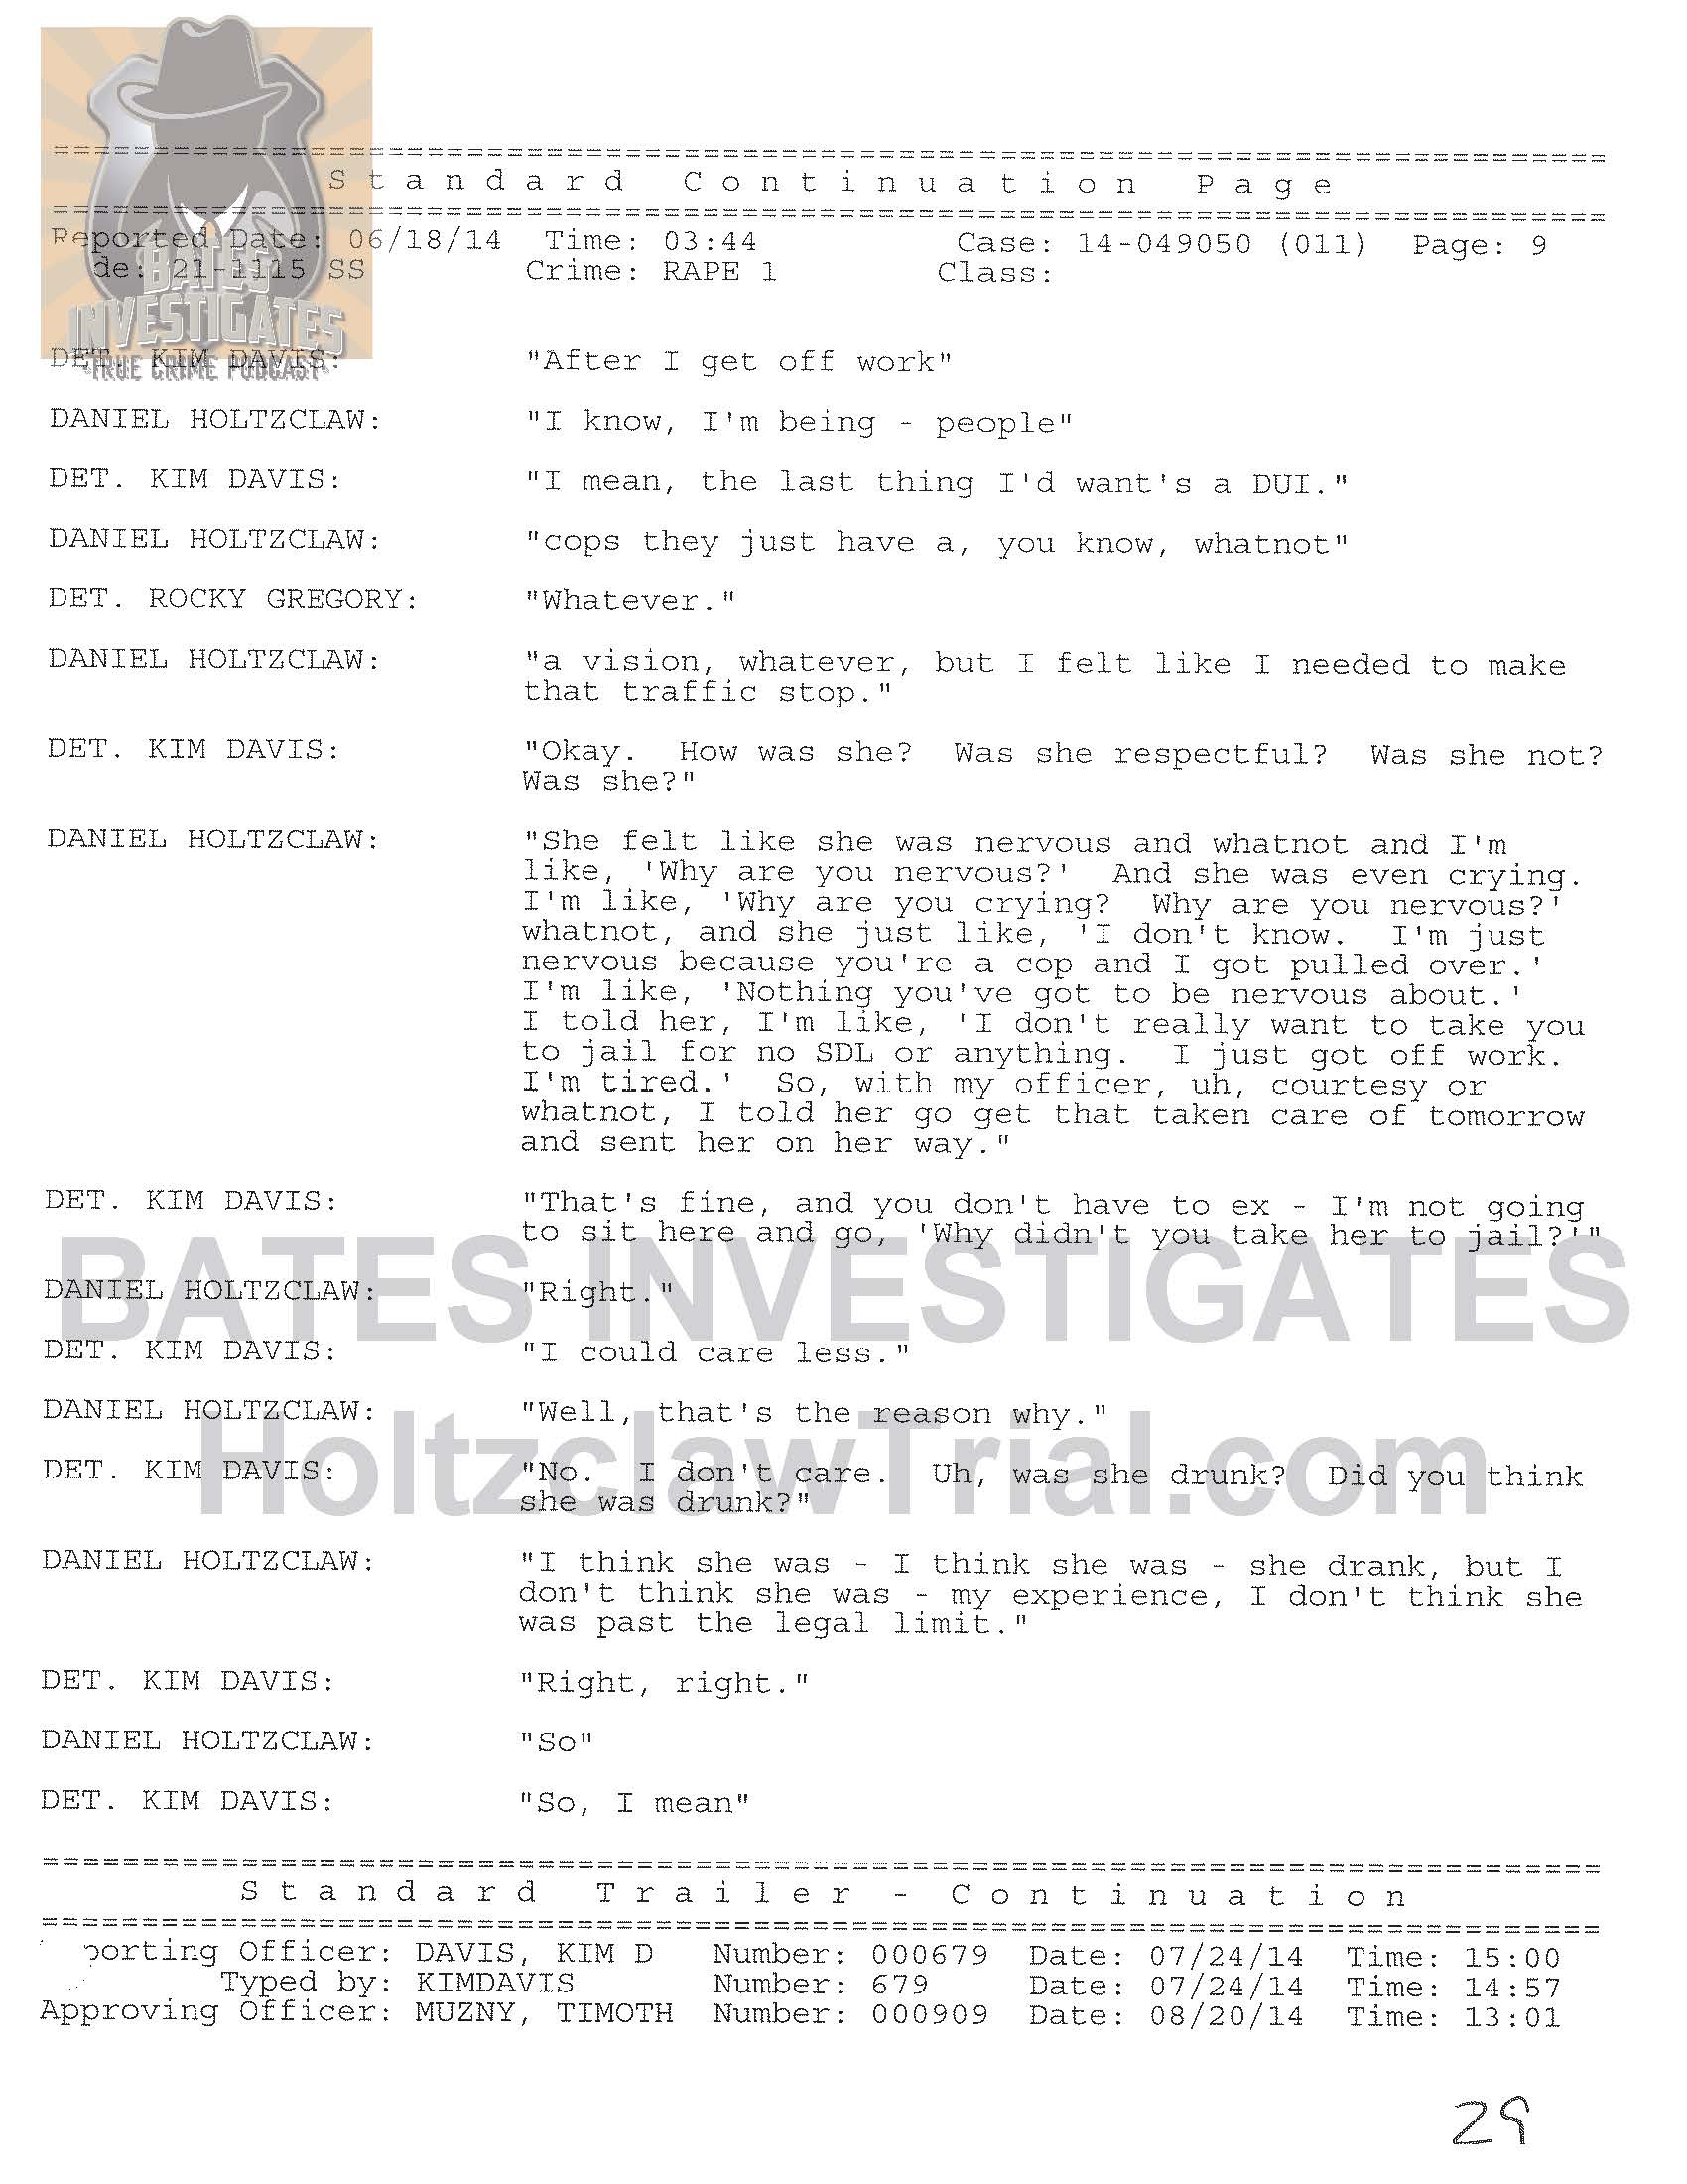 Holtzclaw Interrogation Transcript - Ep02 Redacted_Page_09.jpg